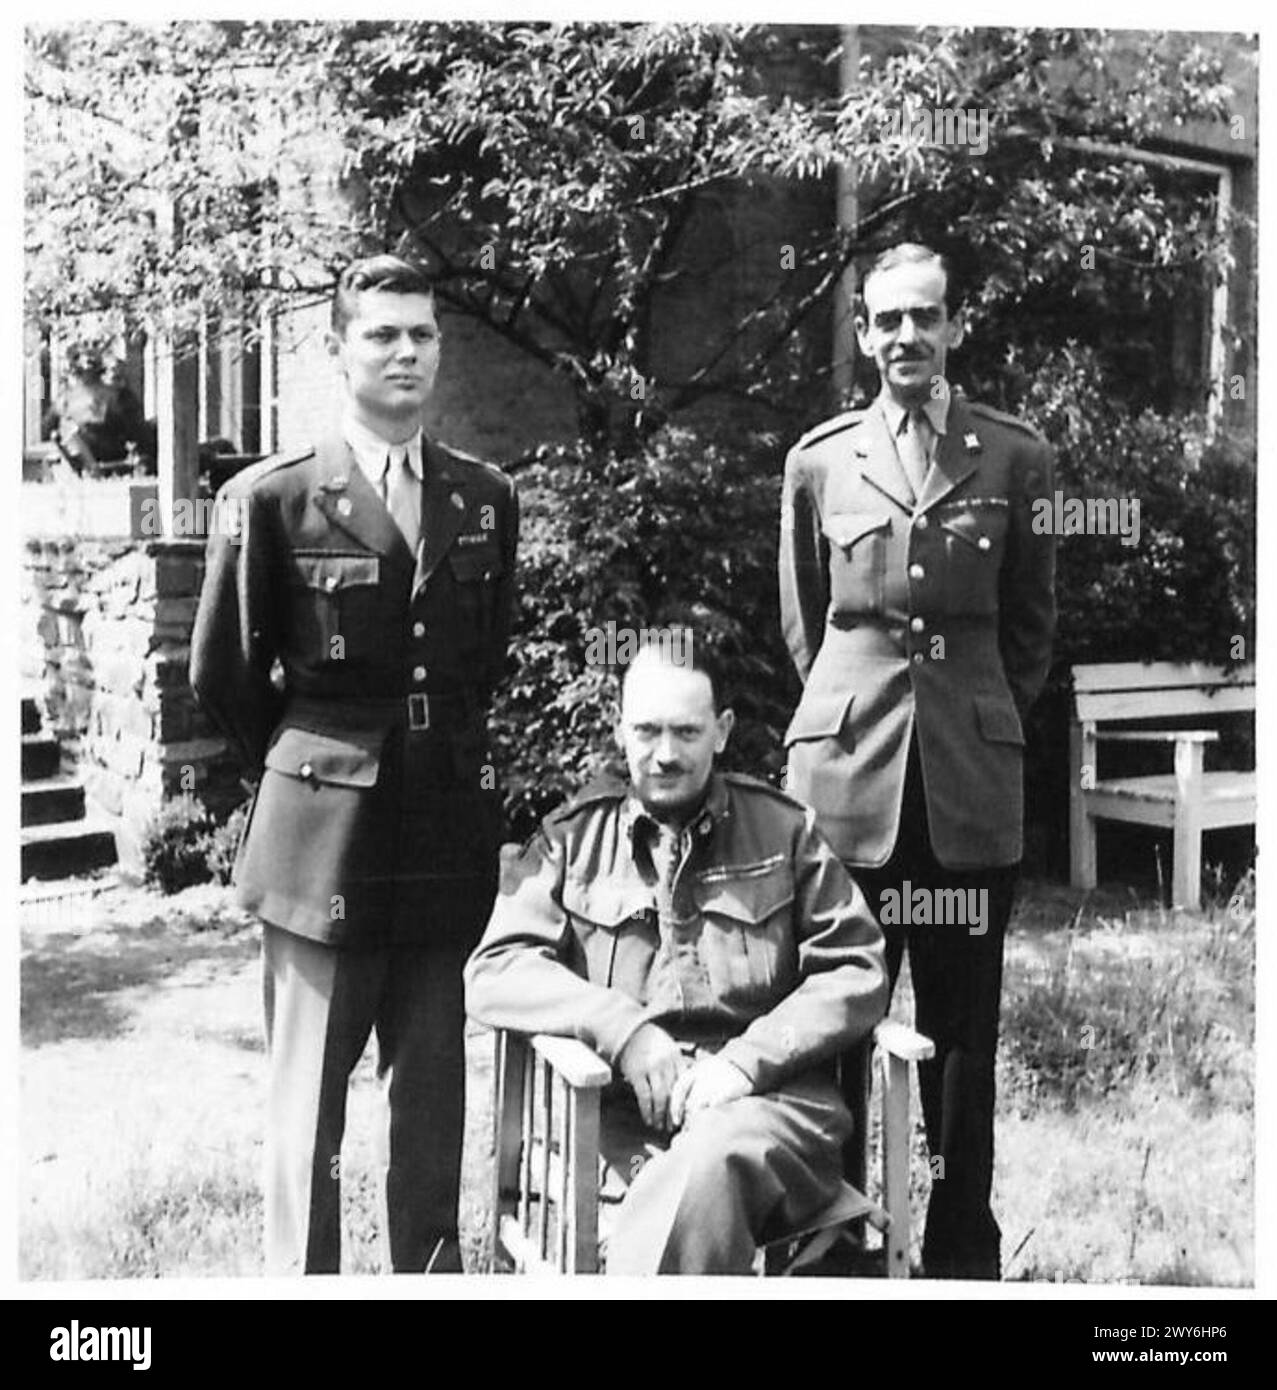 PICTURES OF MAJOR GENERAL SIR F.W. DE GUINGAND, KBE.,CB.,DSO., CHIEF OF STAFF TO 21 ARMY GROUP - The Chief of Staff with his A.D.C. and P.A. Left to right - Major E.R. Culvert, A.D.C. Major General Sir F.W. de Guingand, and Major W.F.Bovill, P.A. , British Army, 21st Army Group Stock Photo